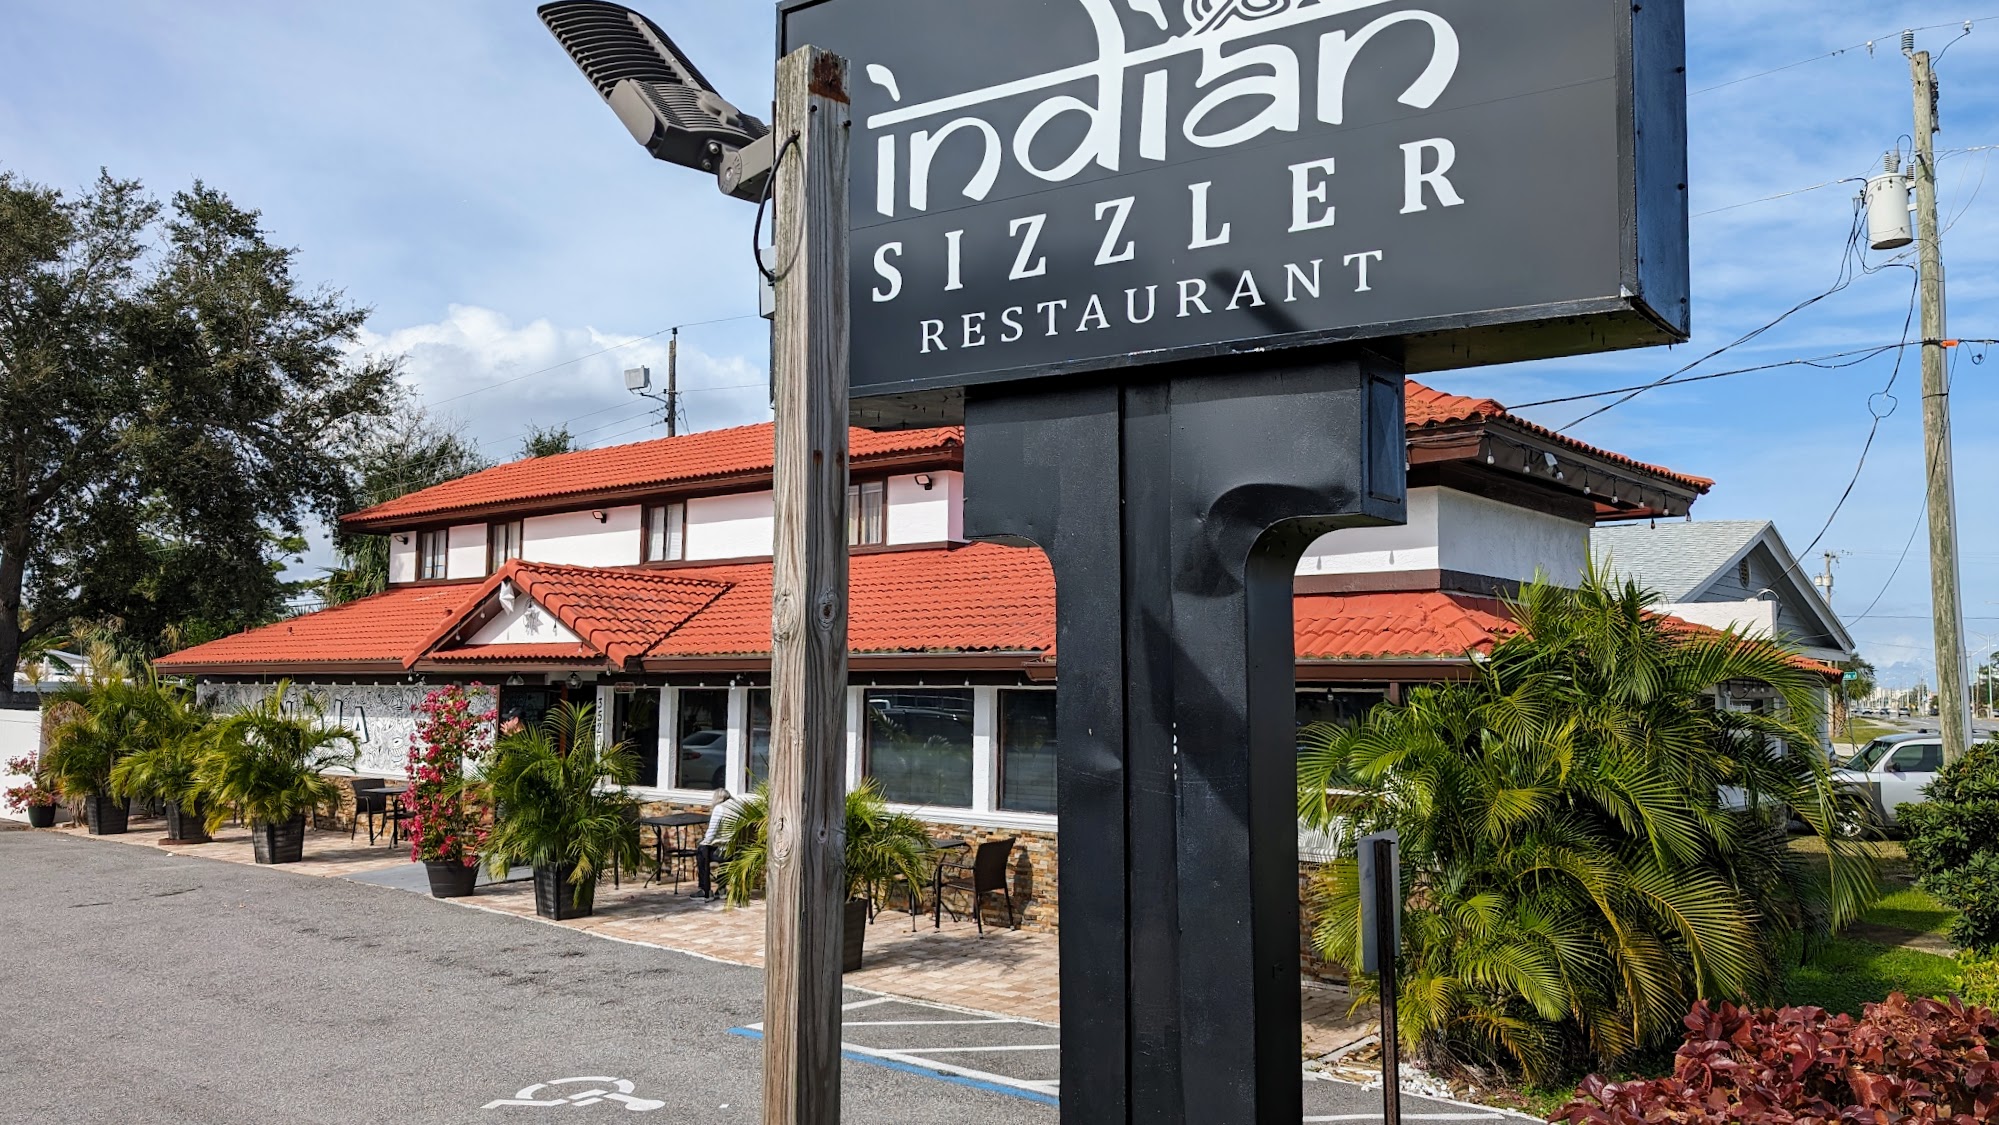 Indian Sizzler